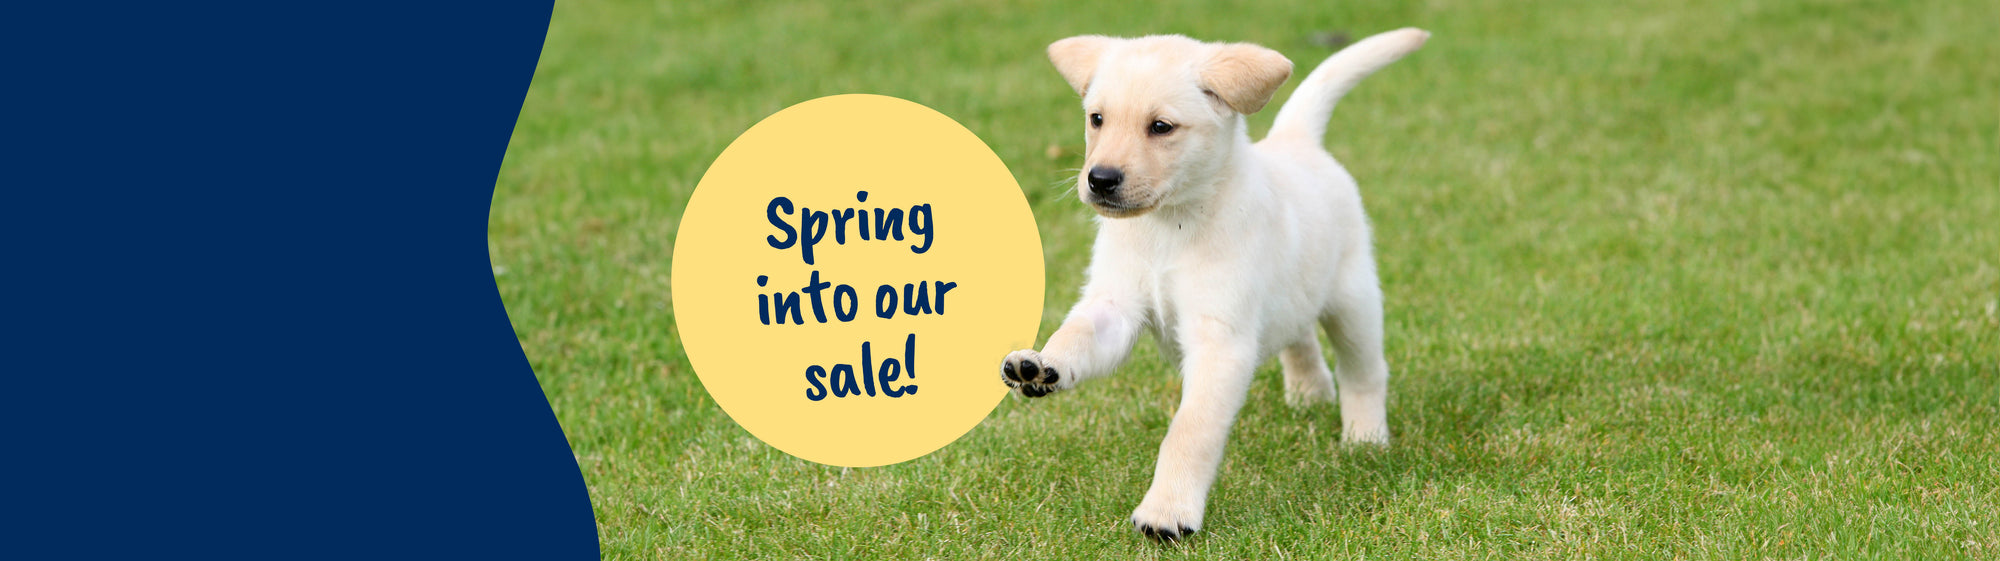 A Yellow Labrador puppy skipping on green grass. There's text in a yellow roundel which says 'Spring into our sale!' 